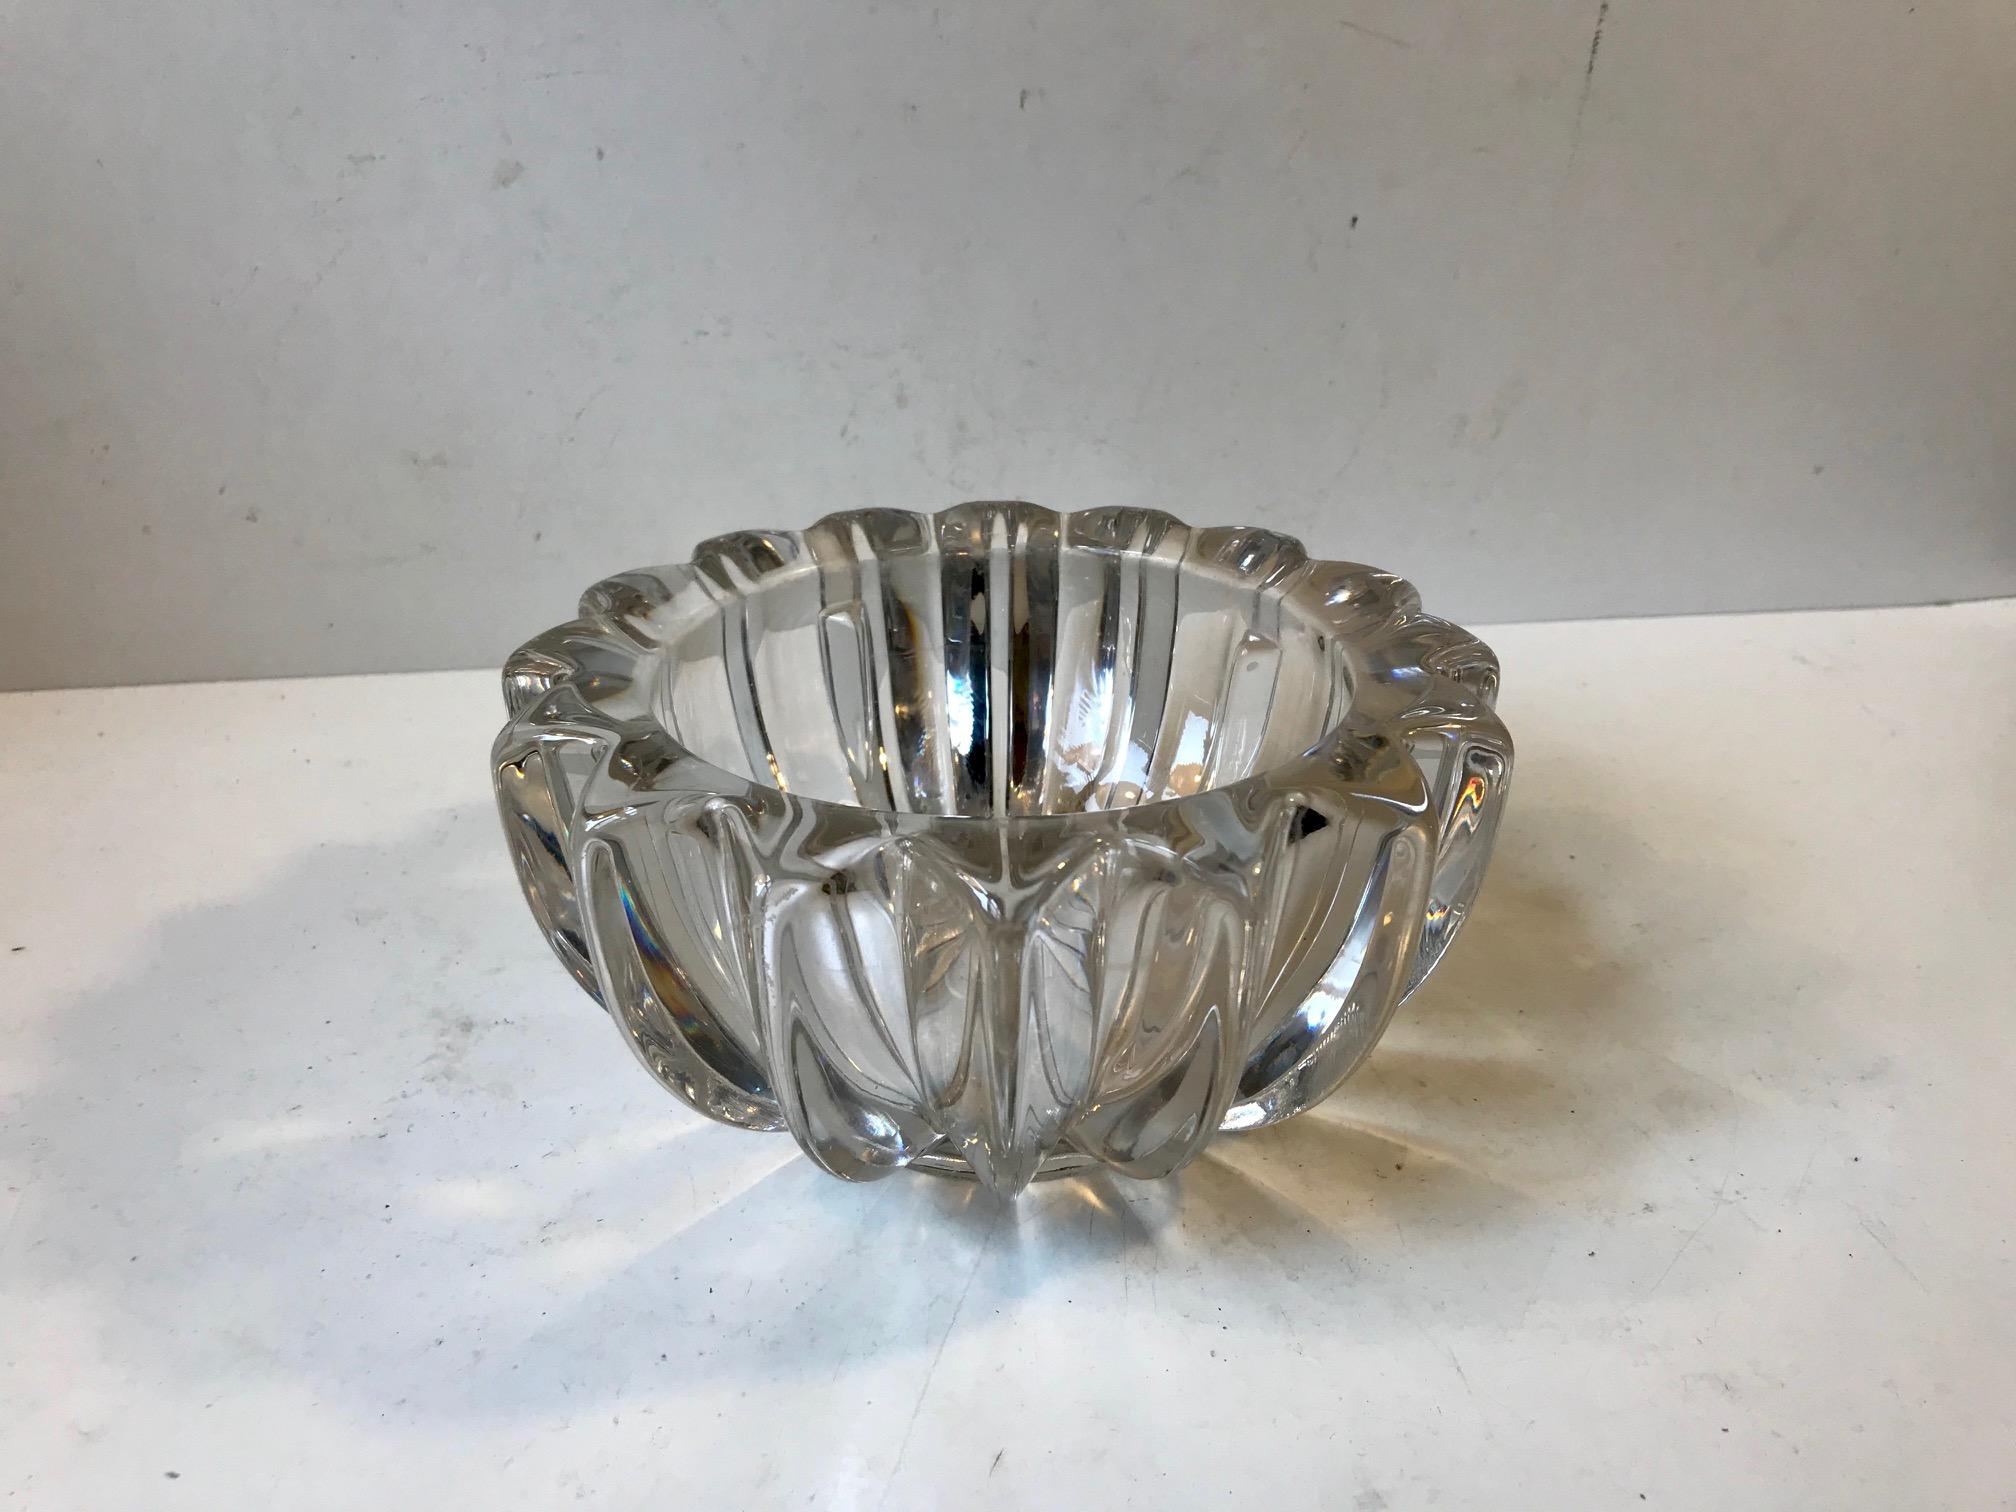 Thick star shaped glass dish designed by Pierre D’avesn during the 1930s. Would make a great candy or chocolate bowl for Christmas. It is signed/marked by the maker to the base.